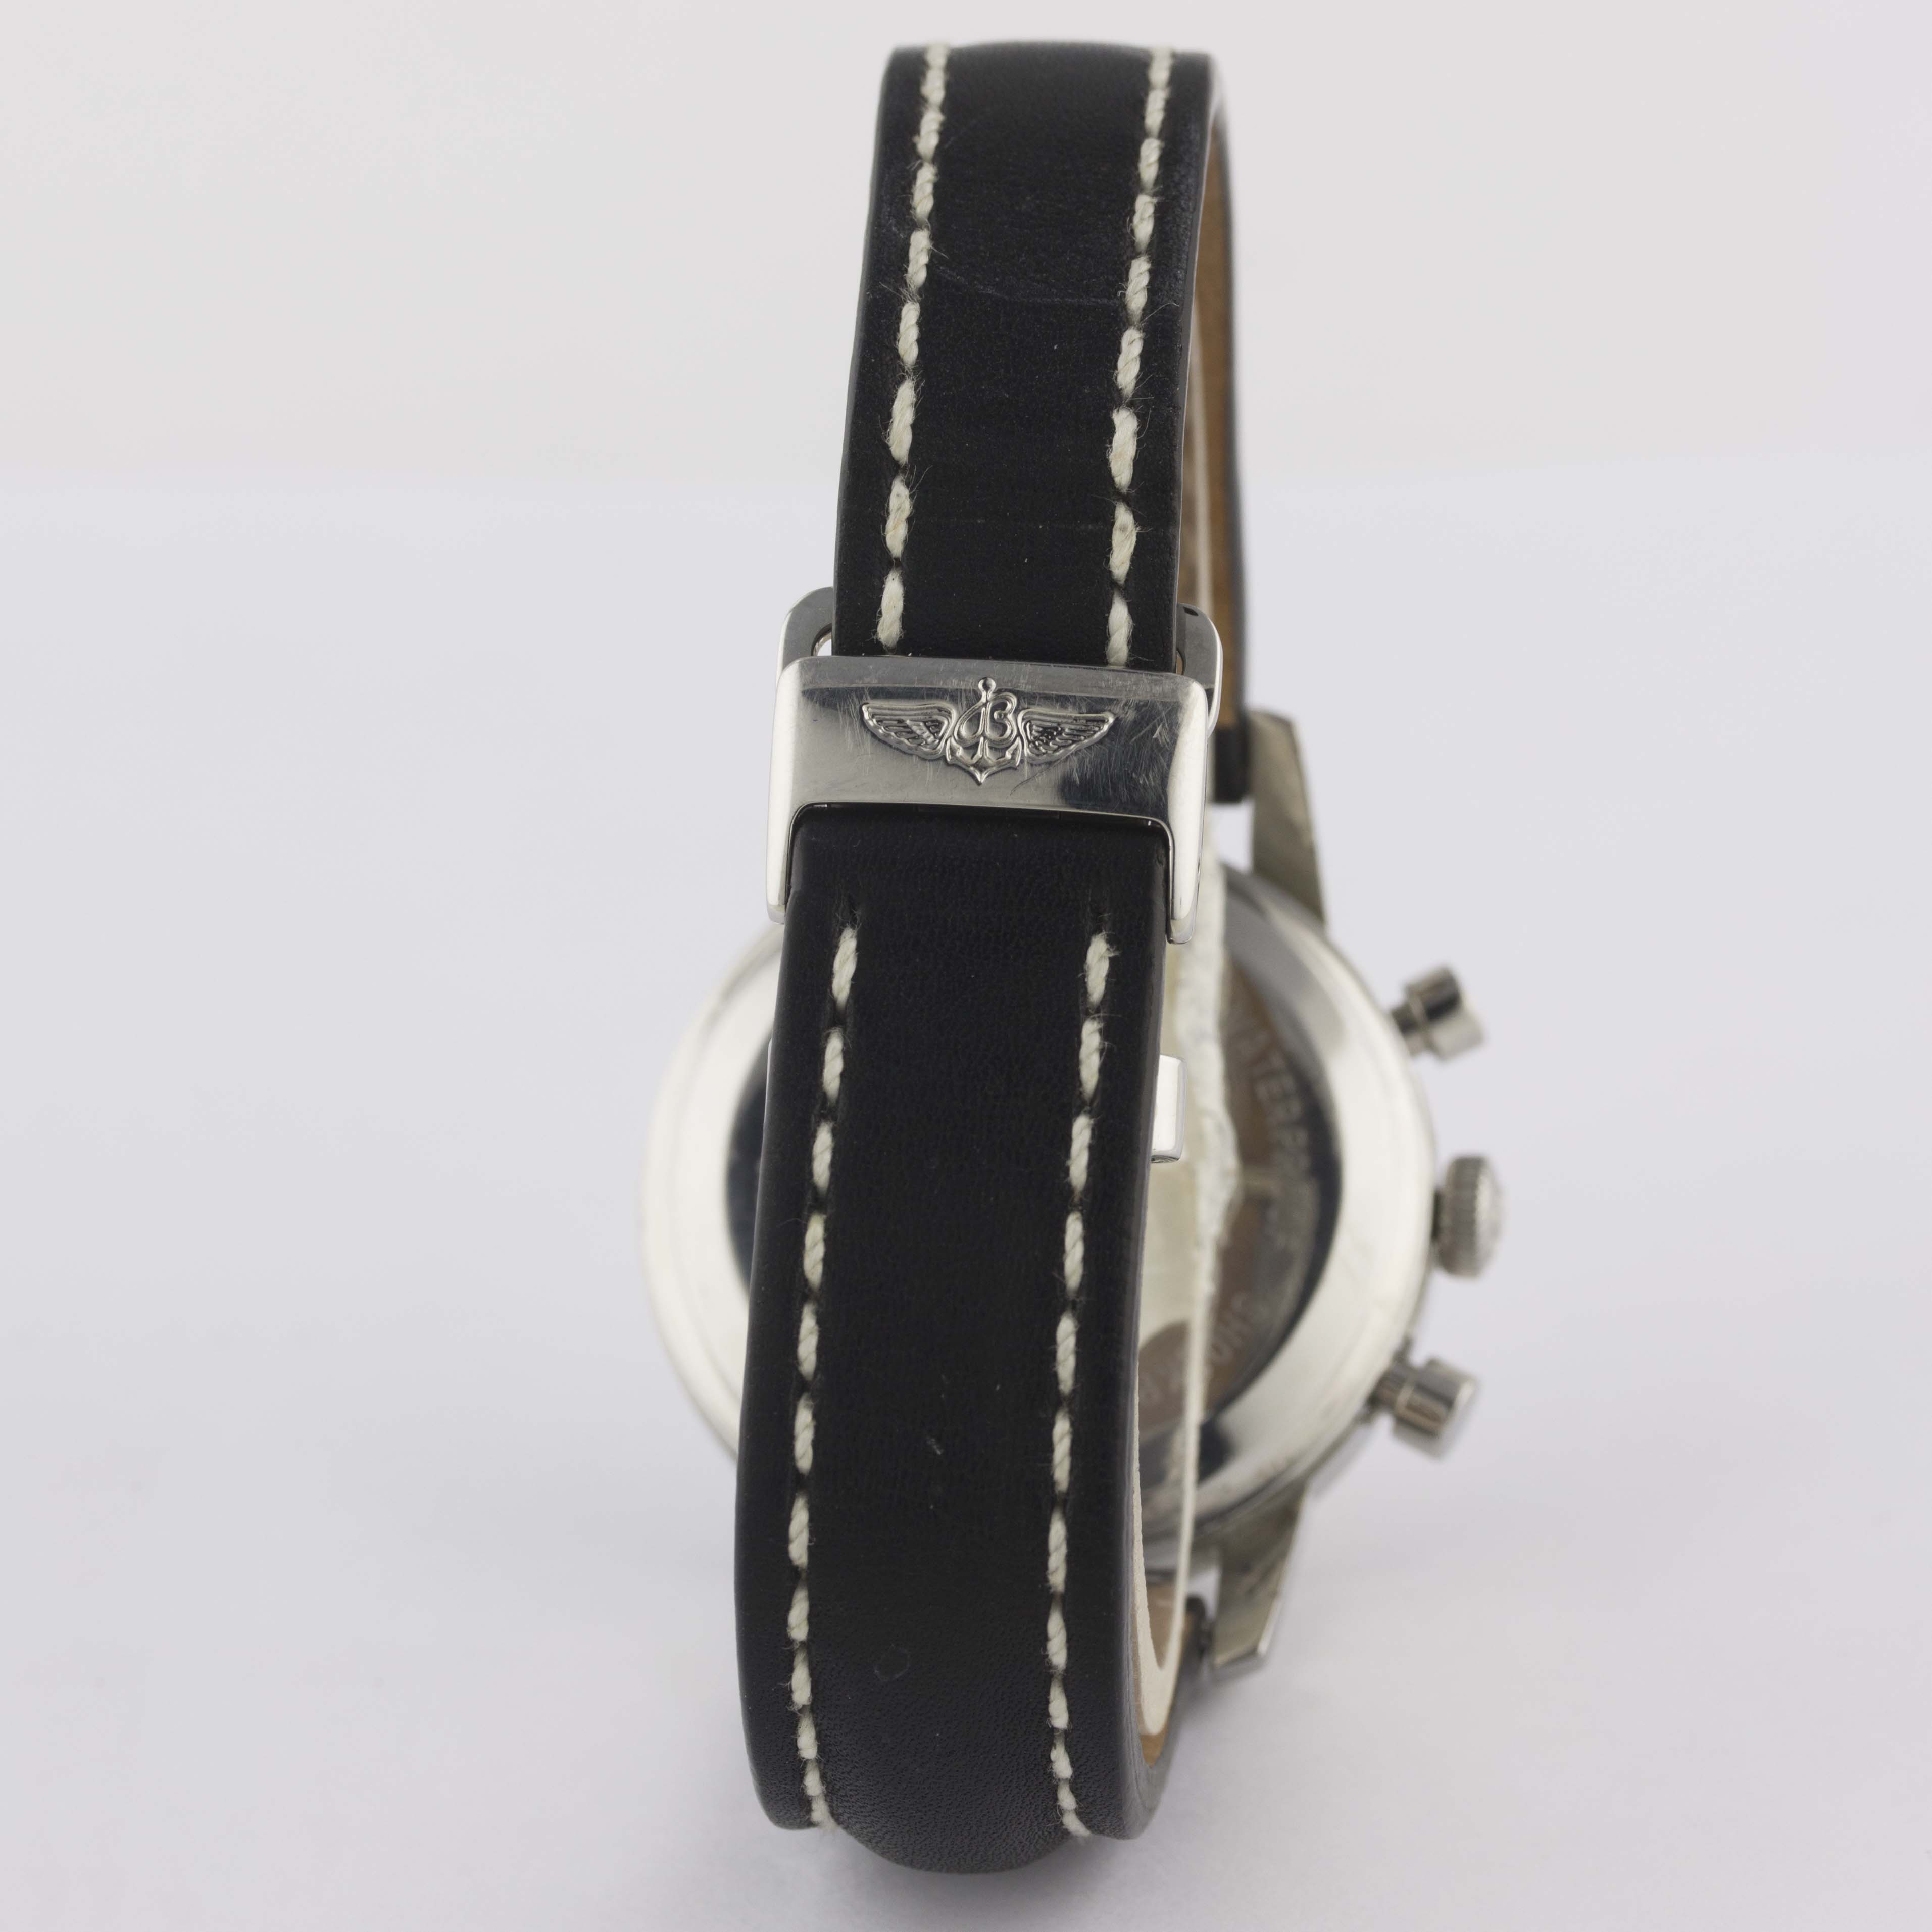 A RARE GENTLEMAN'S STAINLESS STEEL BREITLING TOP TIME 24 HOUR CHRONOGRAPH WRIST WATCH CIRCA 1968, - Image 7 of 12